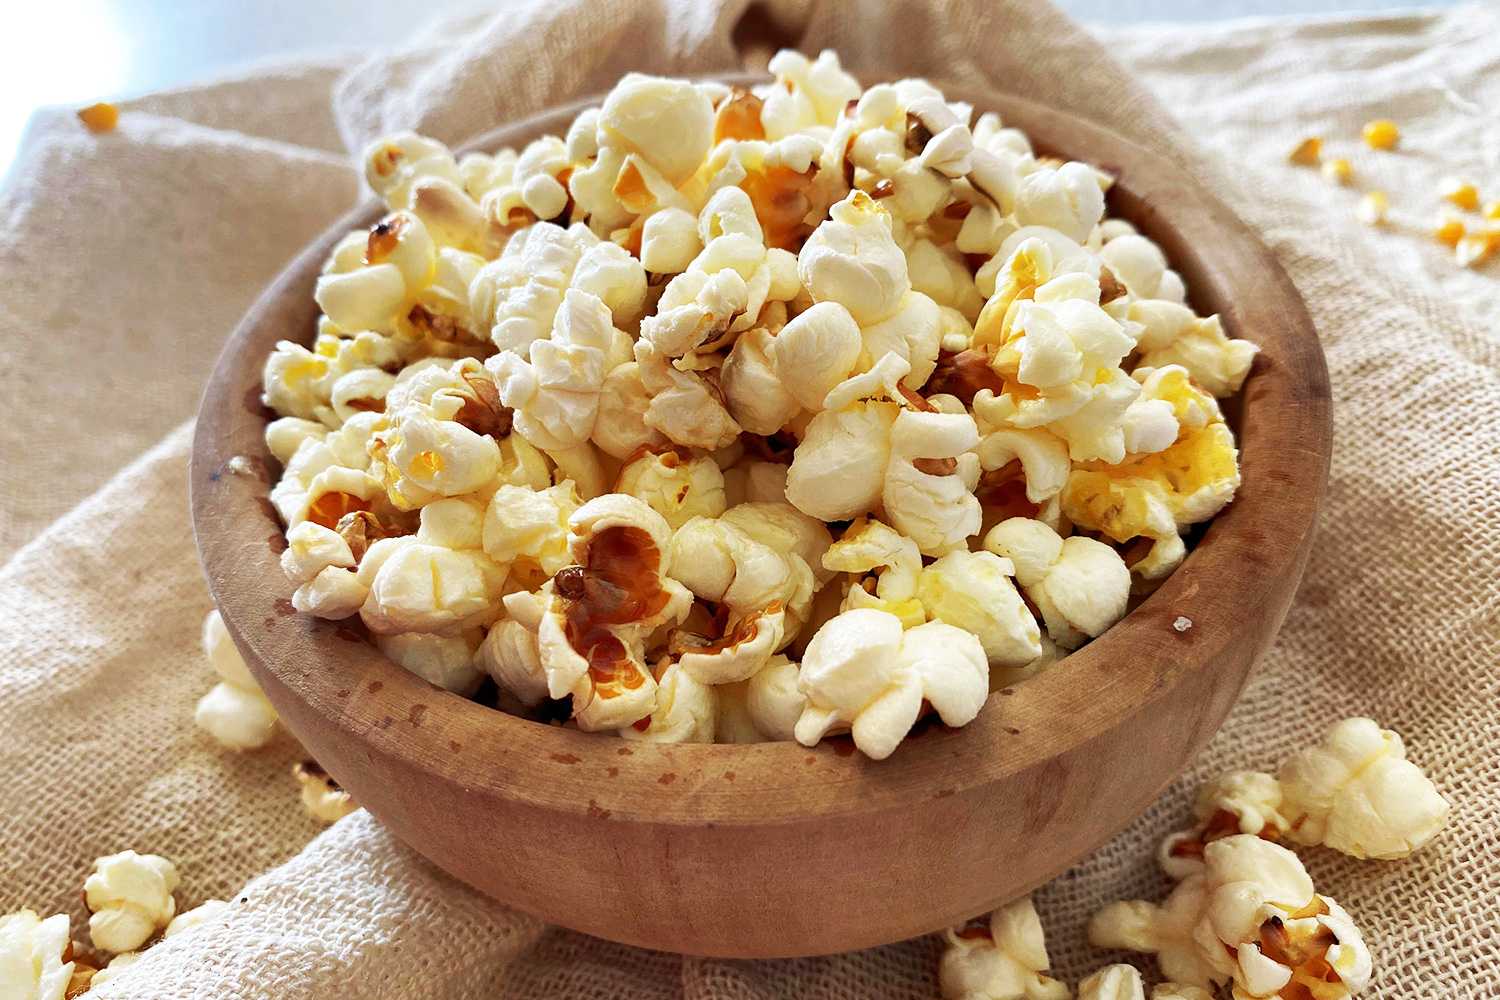 Popcorn in brown bowl with more popcorn on side